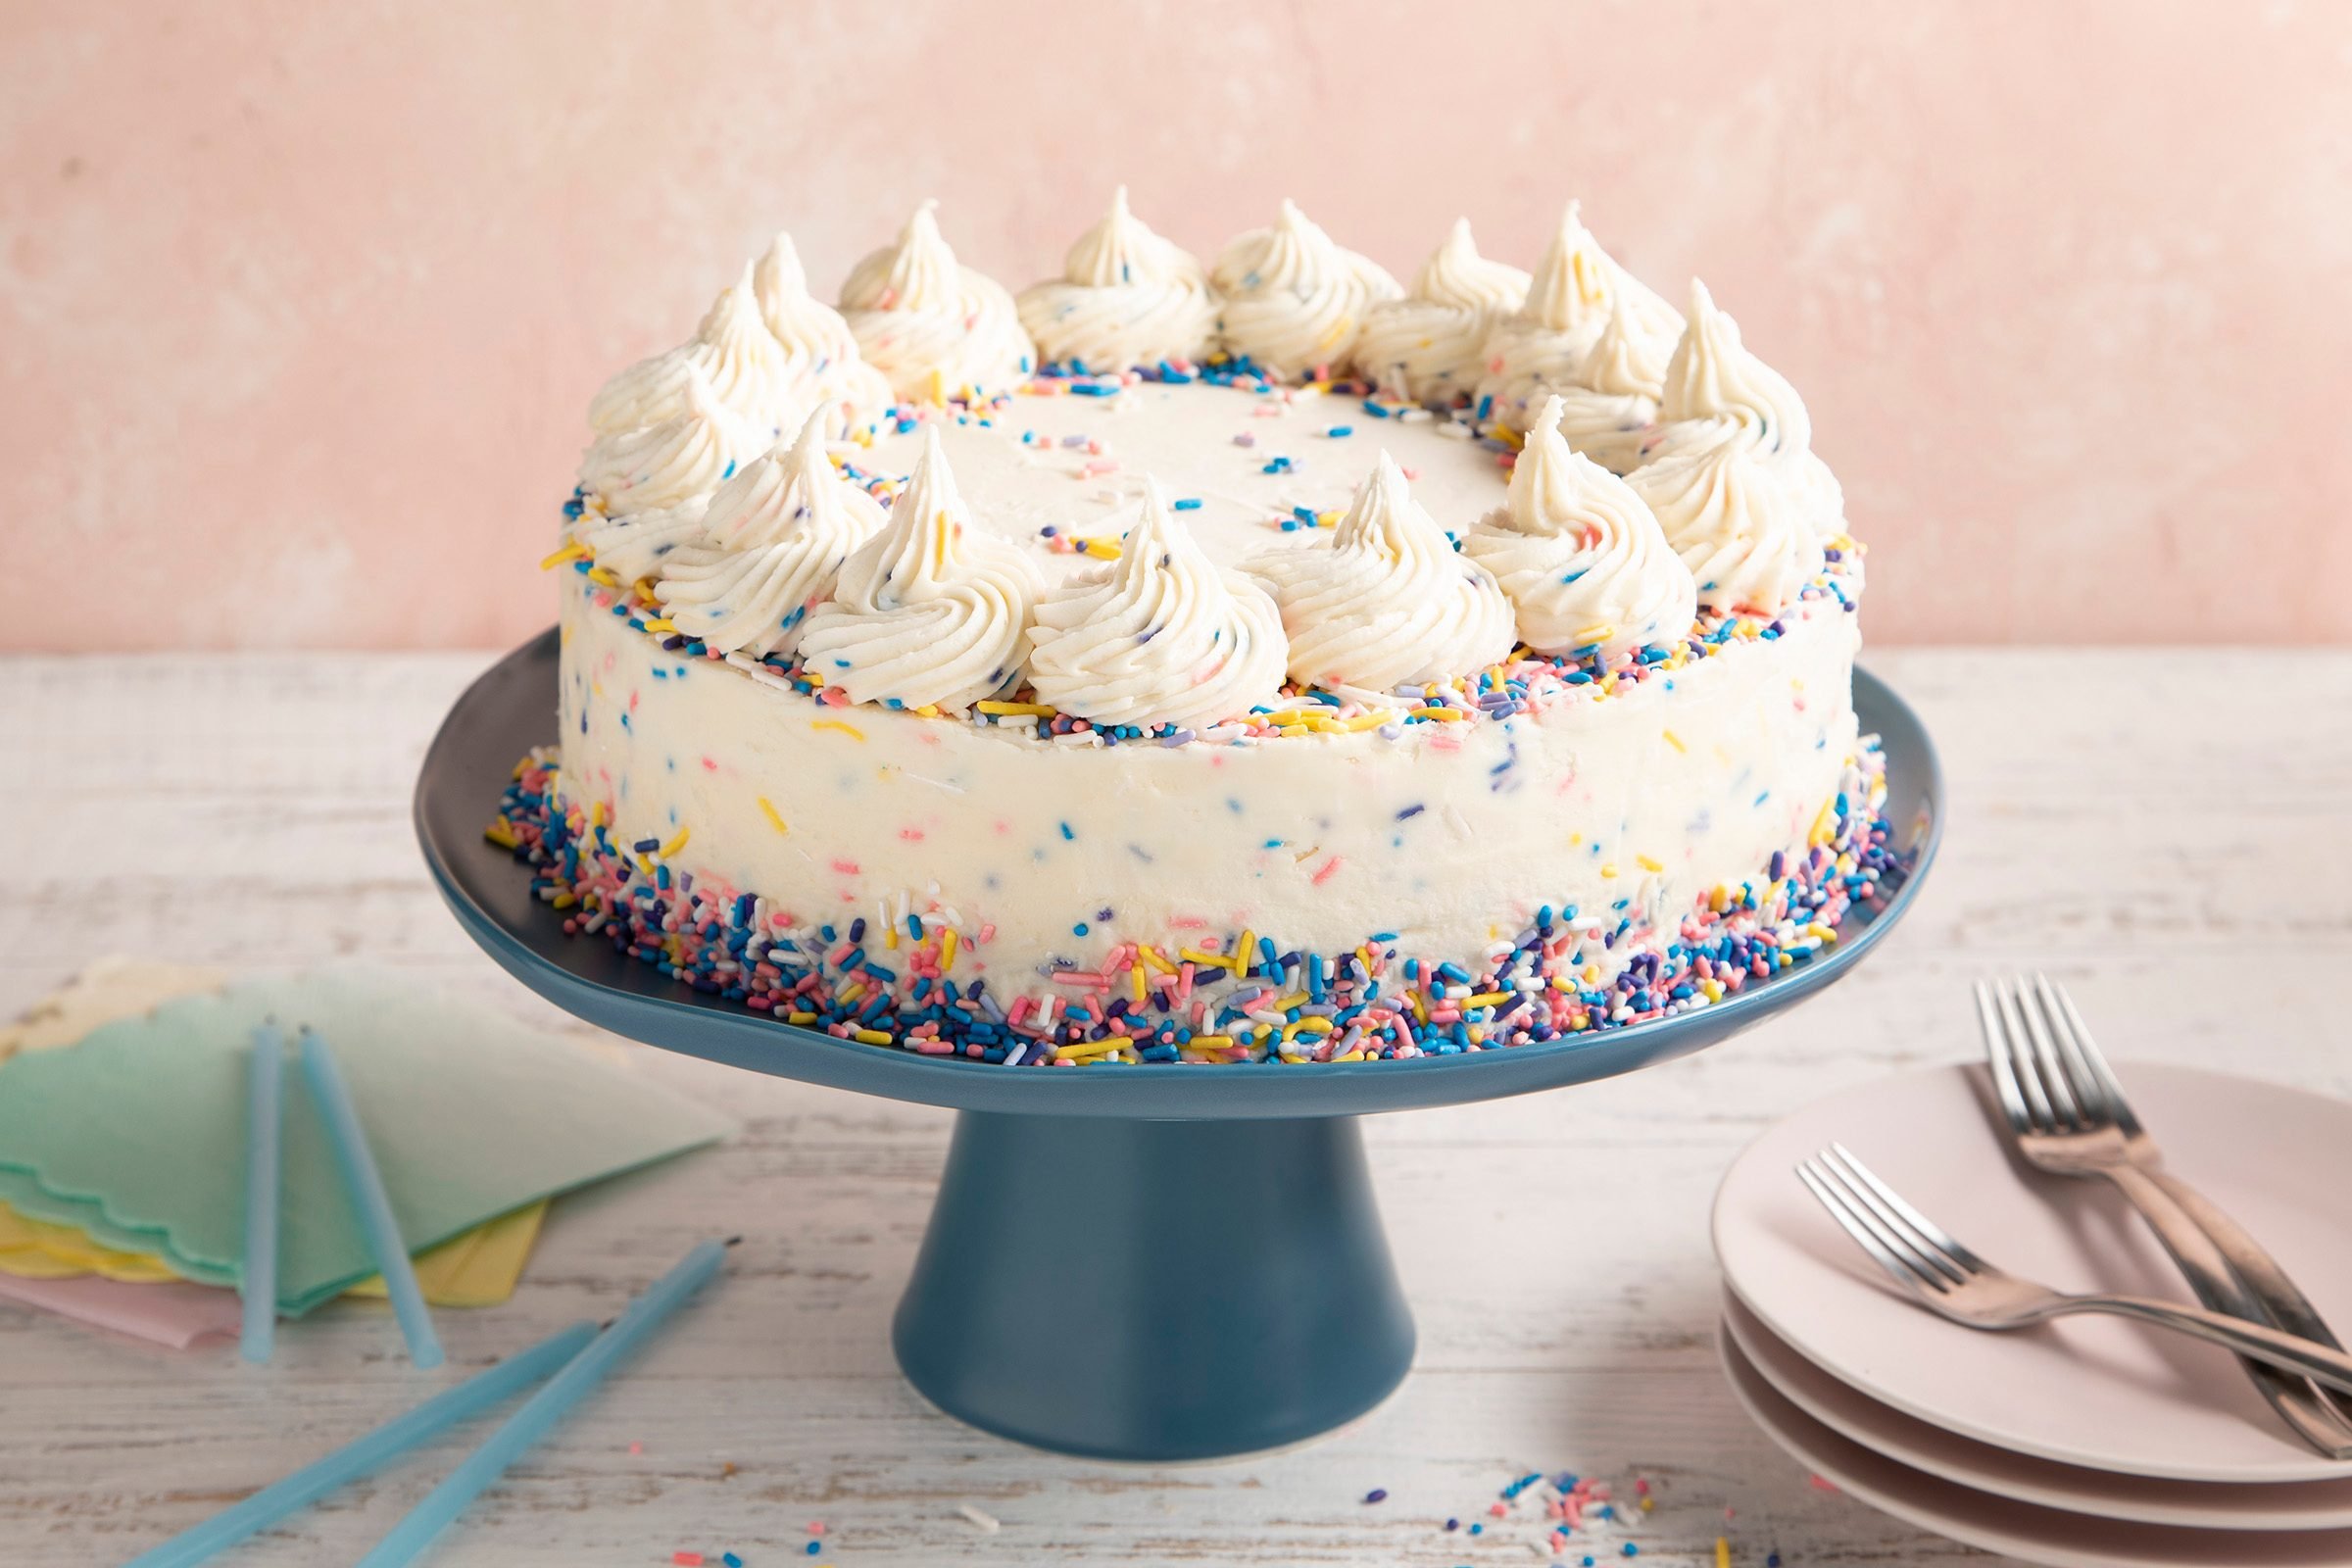 7 Cake Decorating Essentials for a Flawless Cake